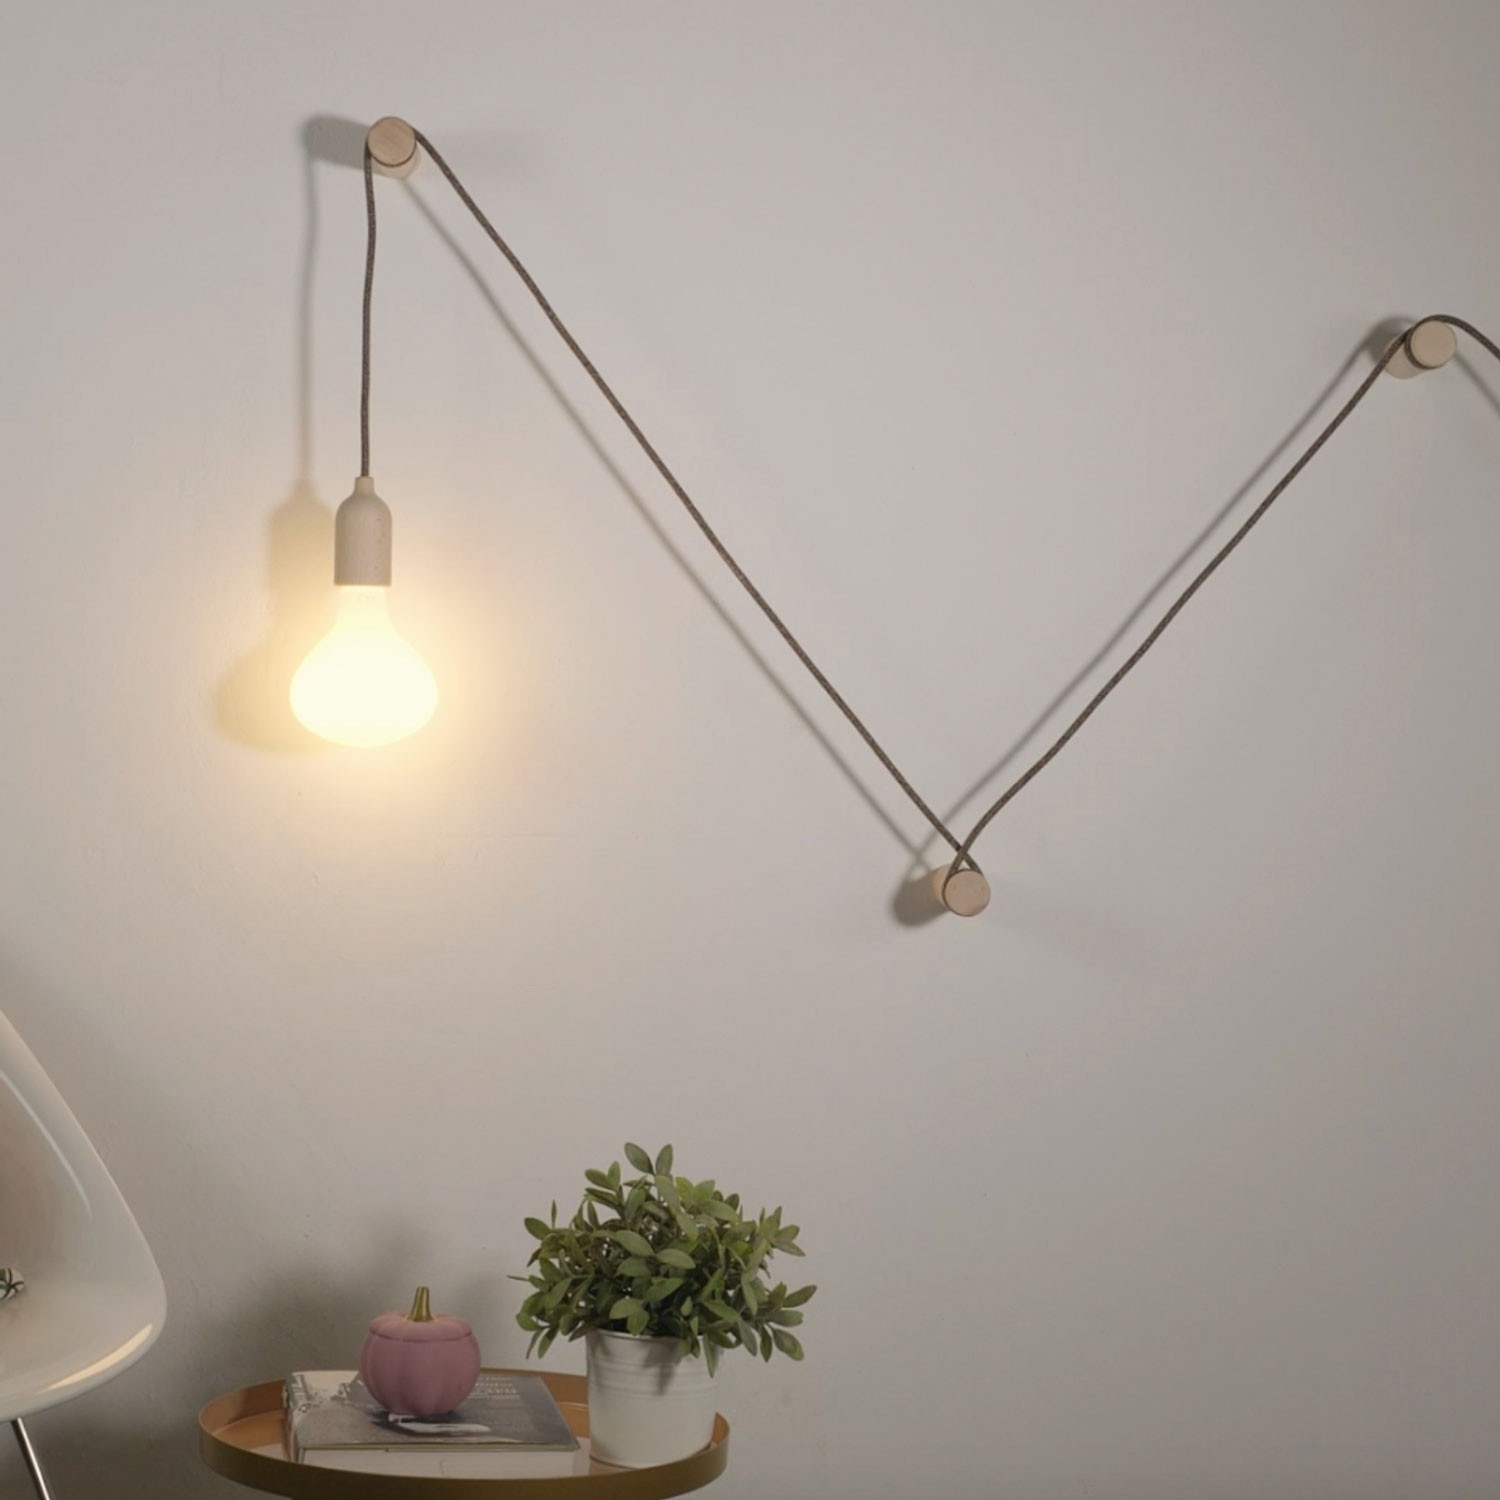 Rolé, wooden wall mount cable tie for pendant lamp